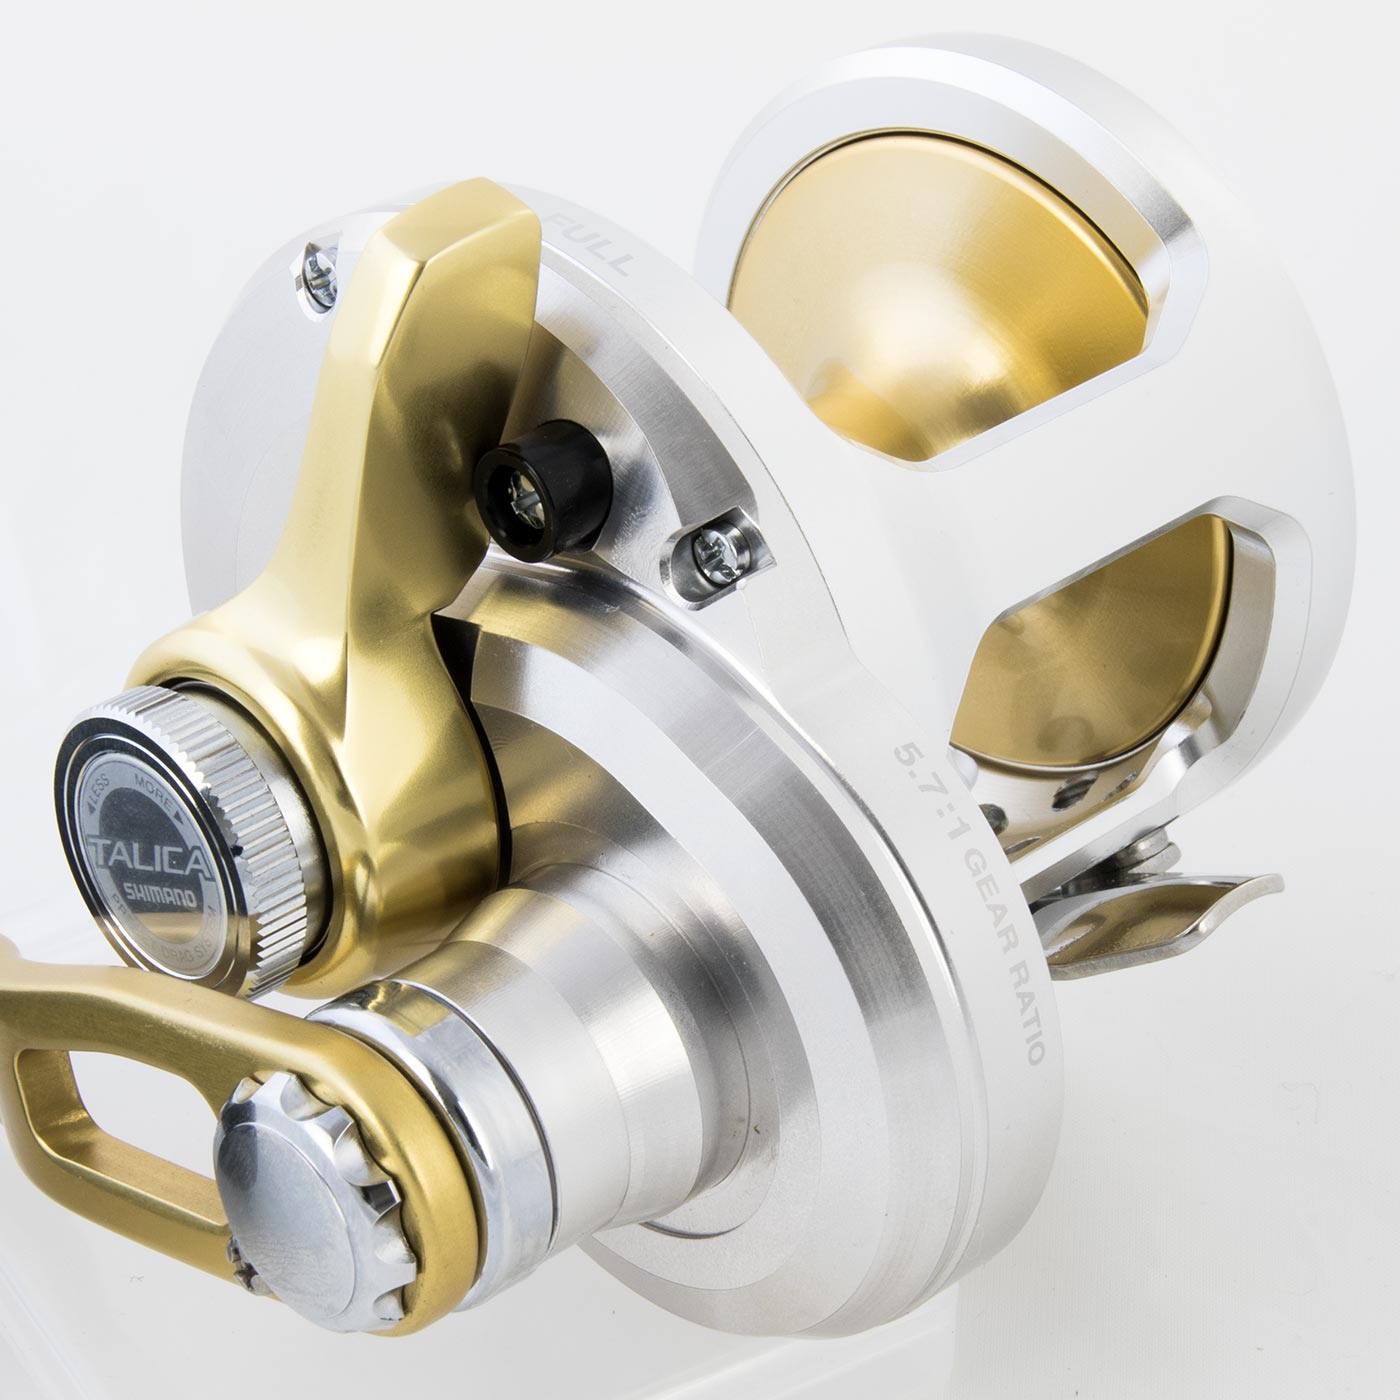 NEW IN BOX Shimano Talica 16 Lever Drag Conventional Reel TAC16 - Complete